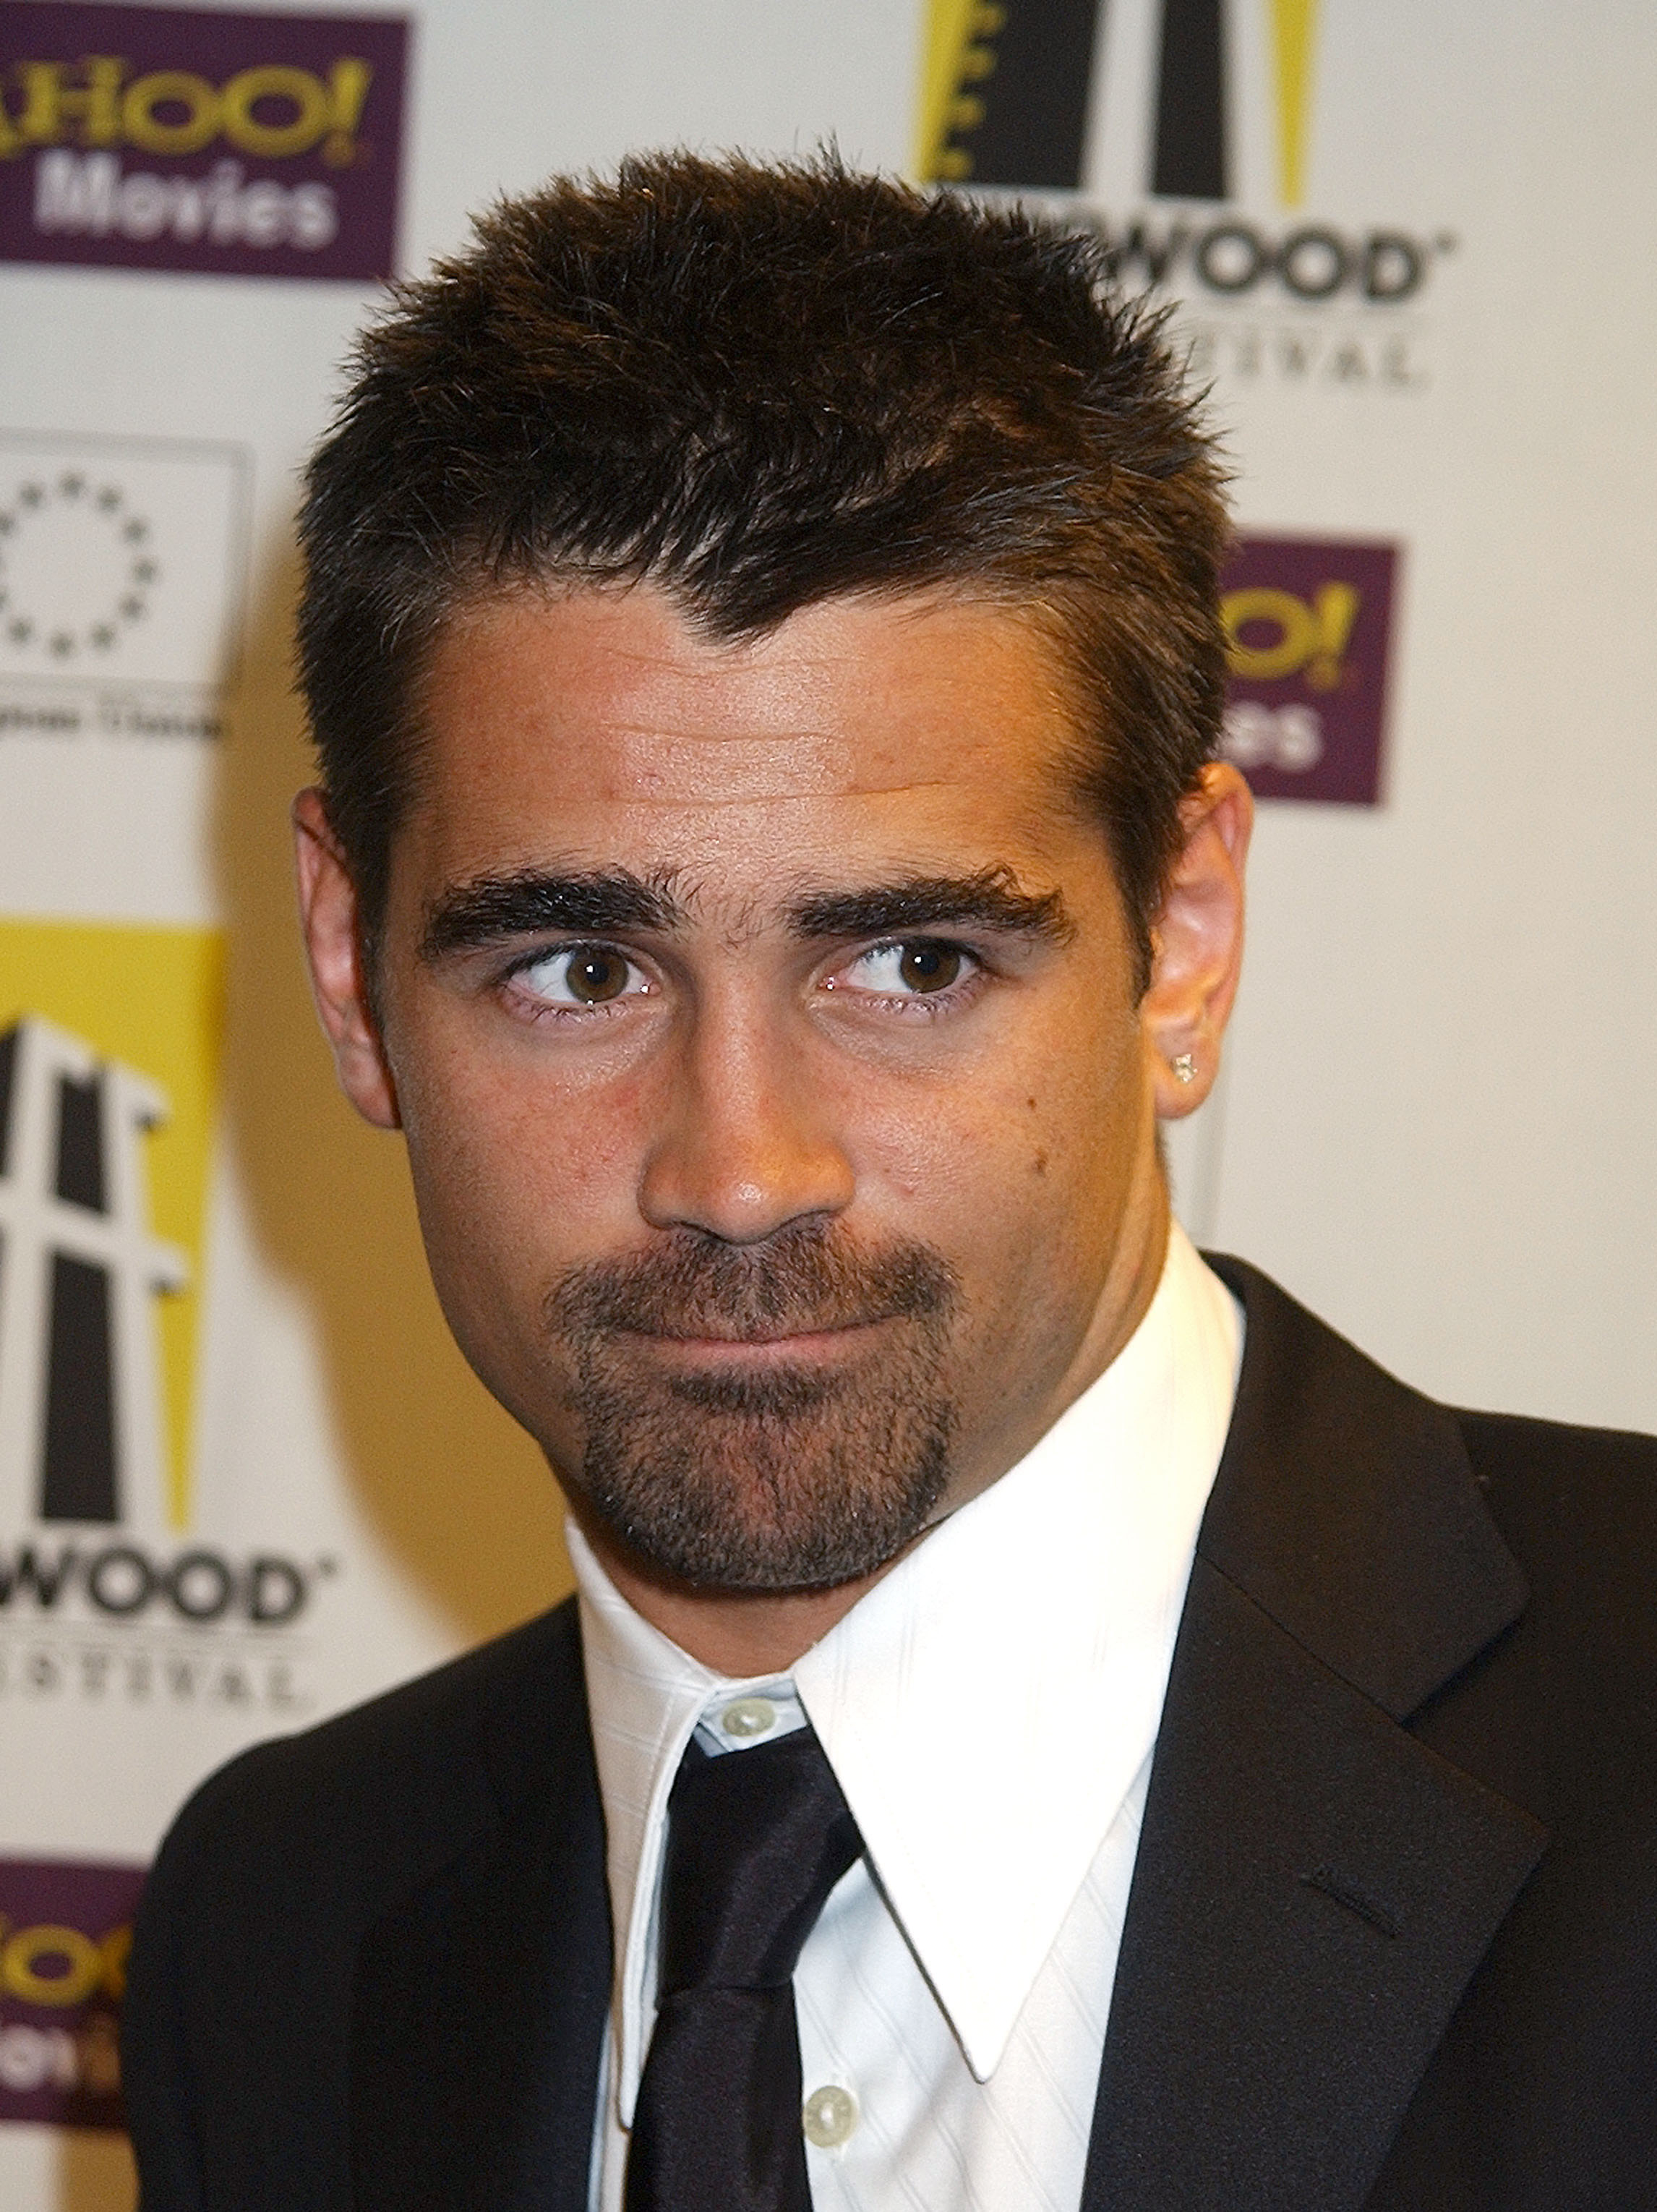 Colin Farrell in 2002 in a suit and tie on the red carpet